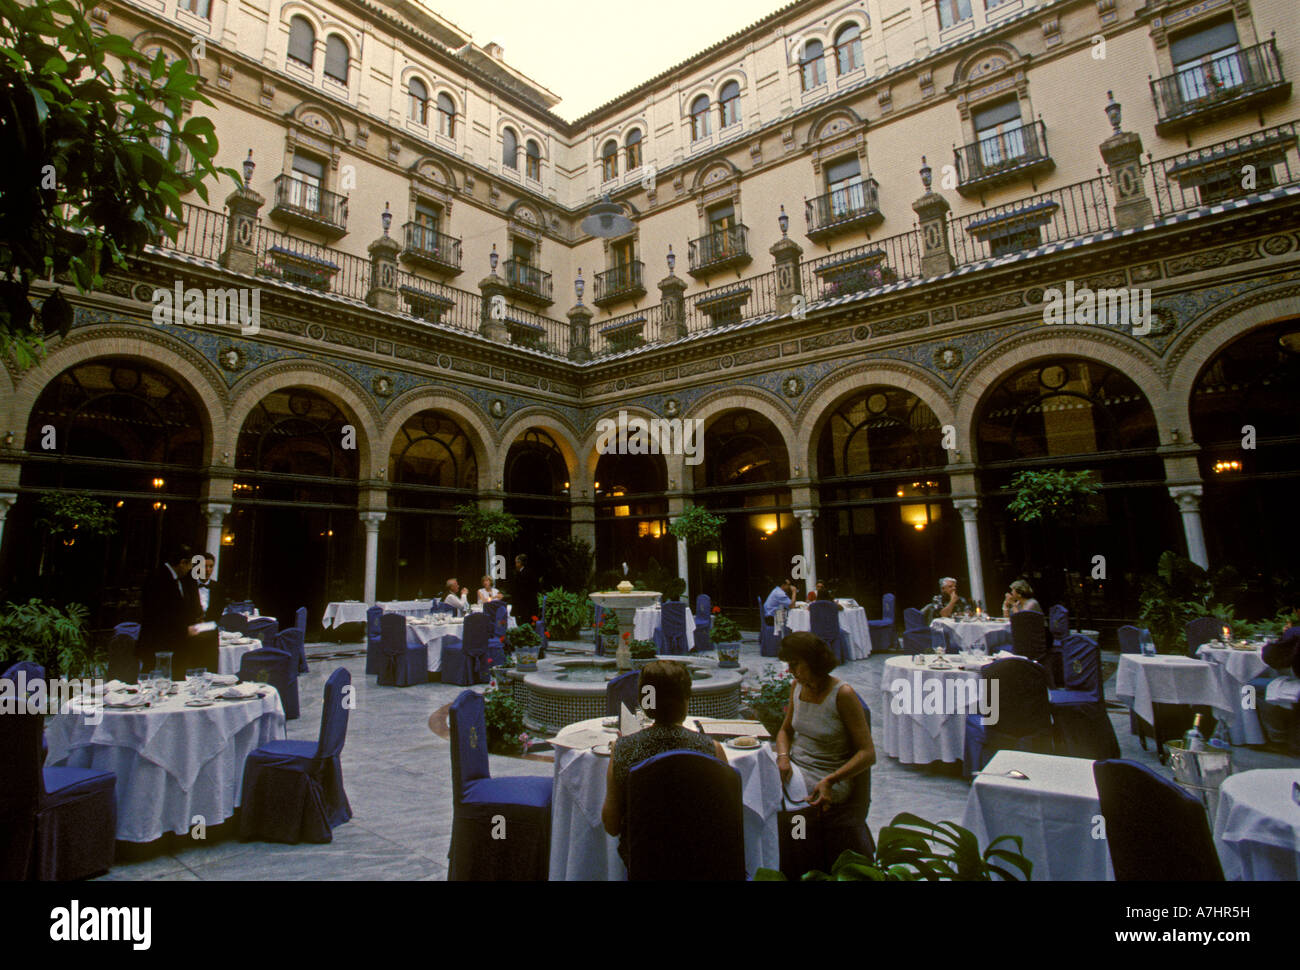 restaurant, Spanish food, Spanish food and drink, food and drink, Spanish cuisine, Hotel Alfonso XIII, Seville, Seville Province, Spain, Europe Stock Photo